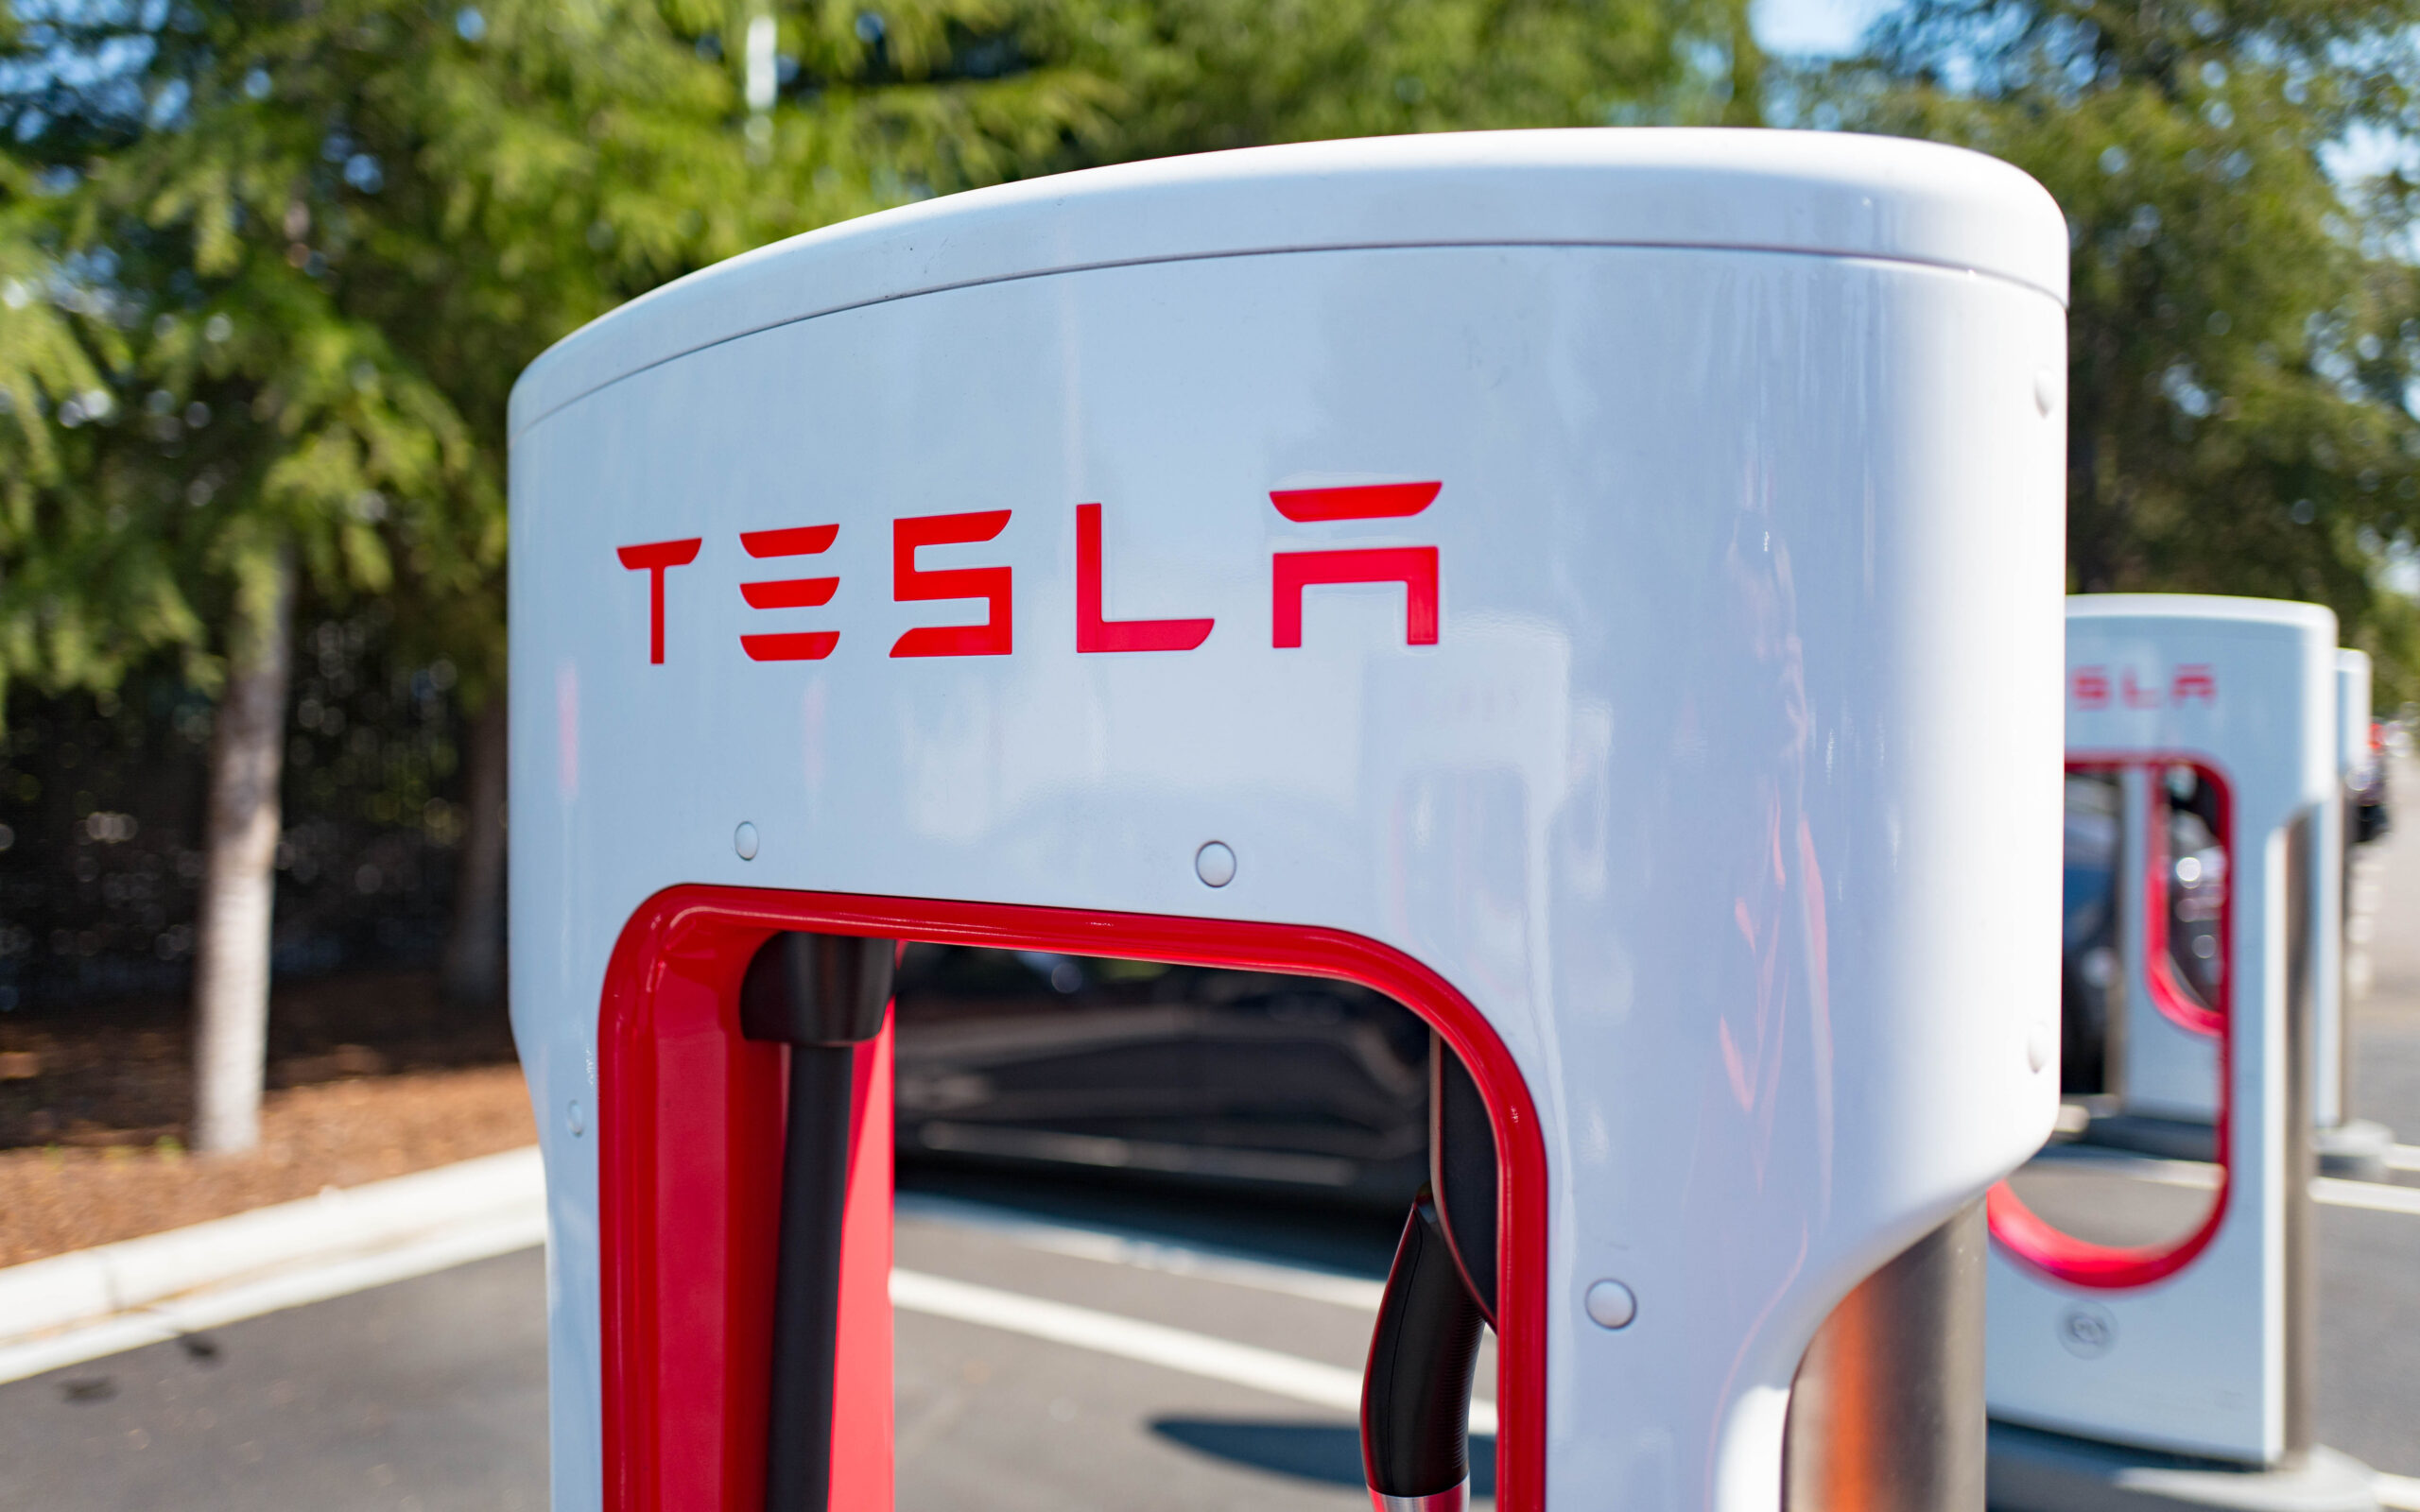 New US EV Charging Plan: Tesla Superchargers for All, Made in America, Triple the Stations